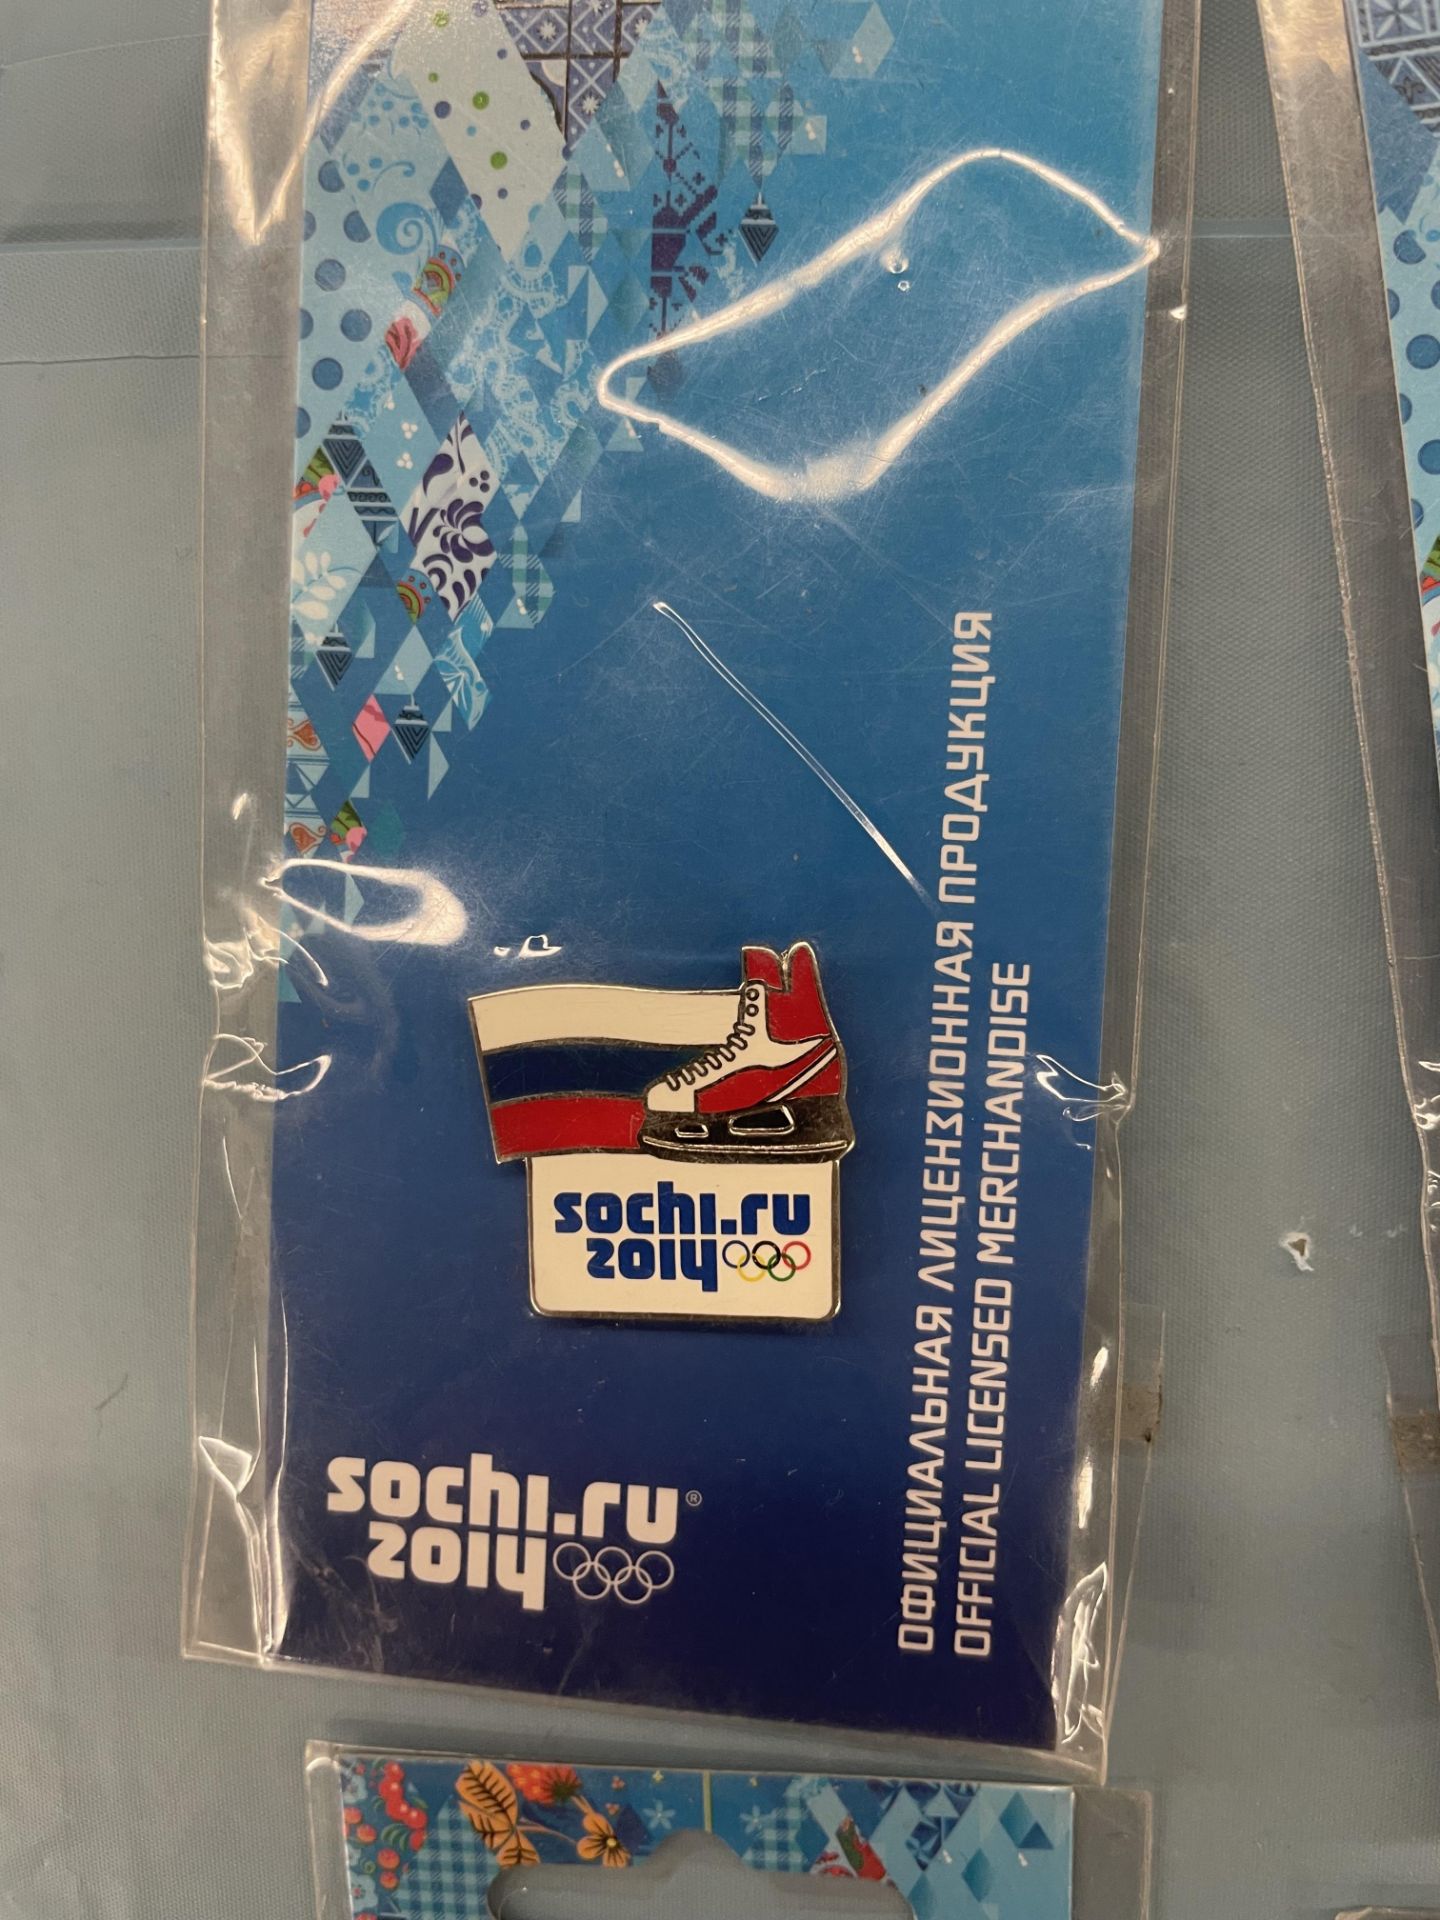 (Lot) (6) Sochi 2014 Russia Olympics Commemorative Pins ( USA, Finland, Russia Sweden, (2) Olympic ) - Image 7 of 8